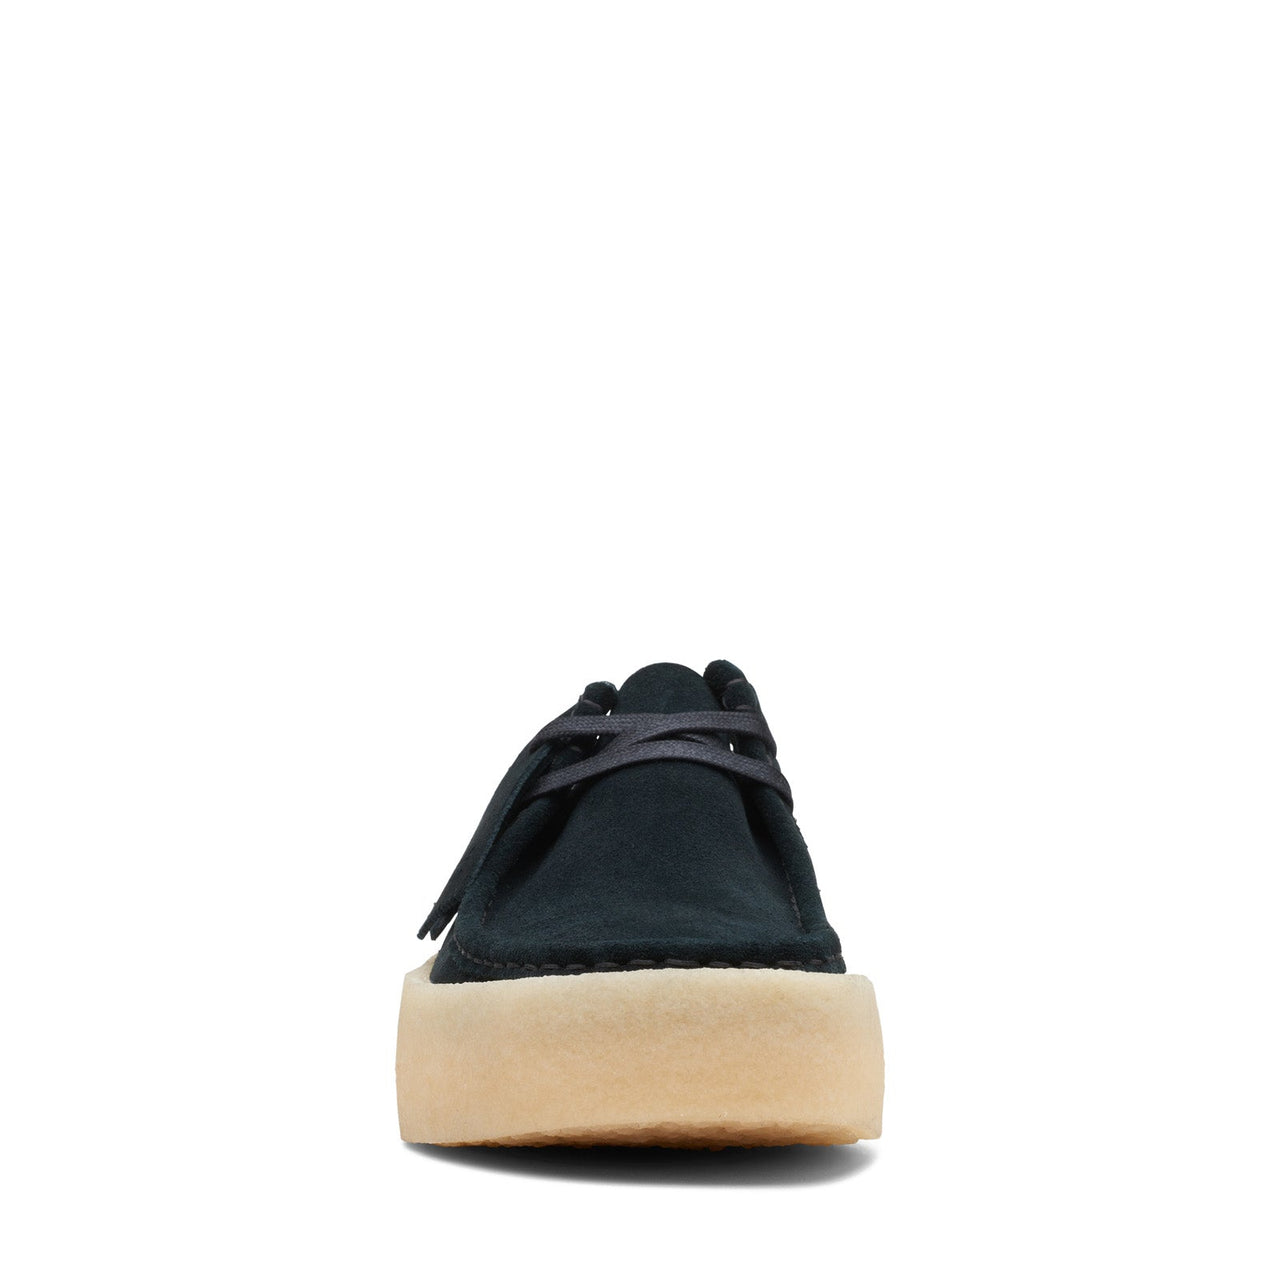 Clarks Wallabee Cup LO 26169189 Womens Black Suede Clogs Sandals Shoes